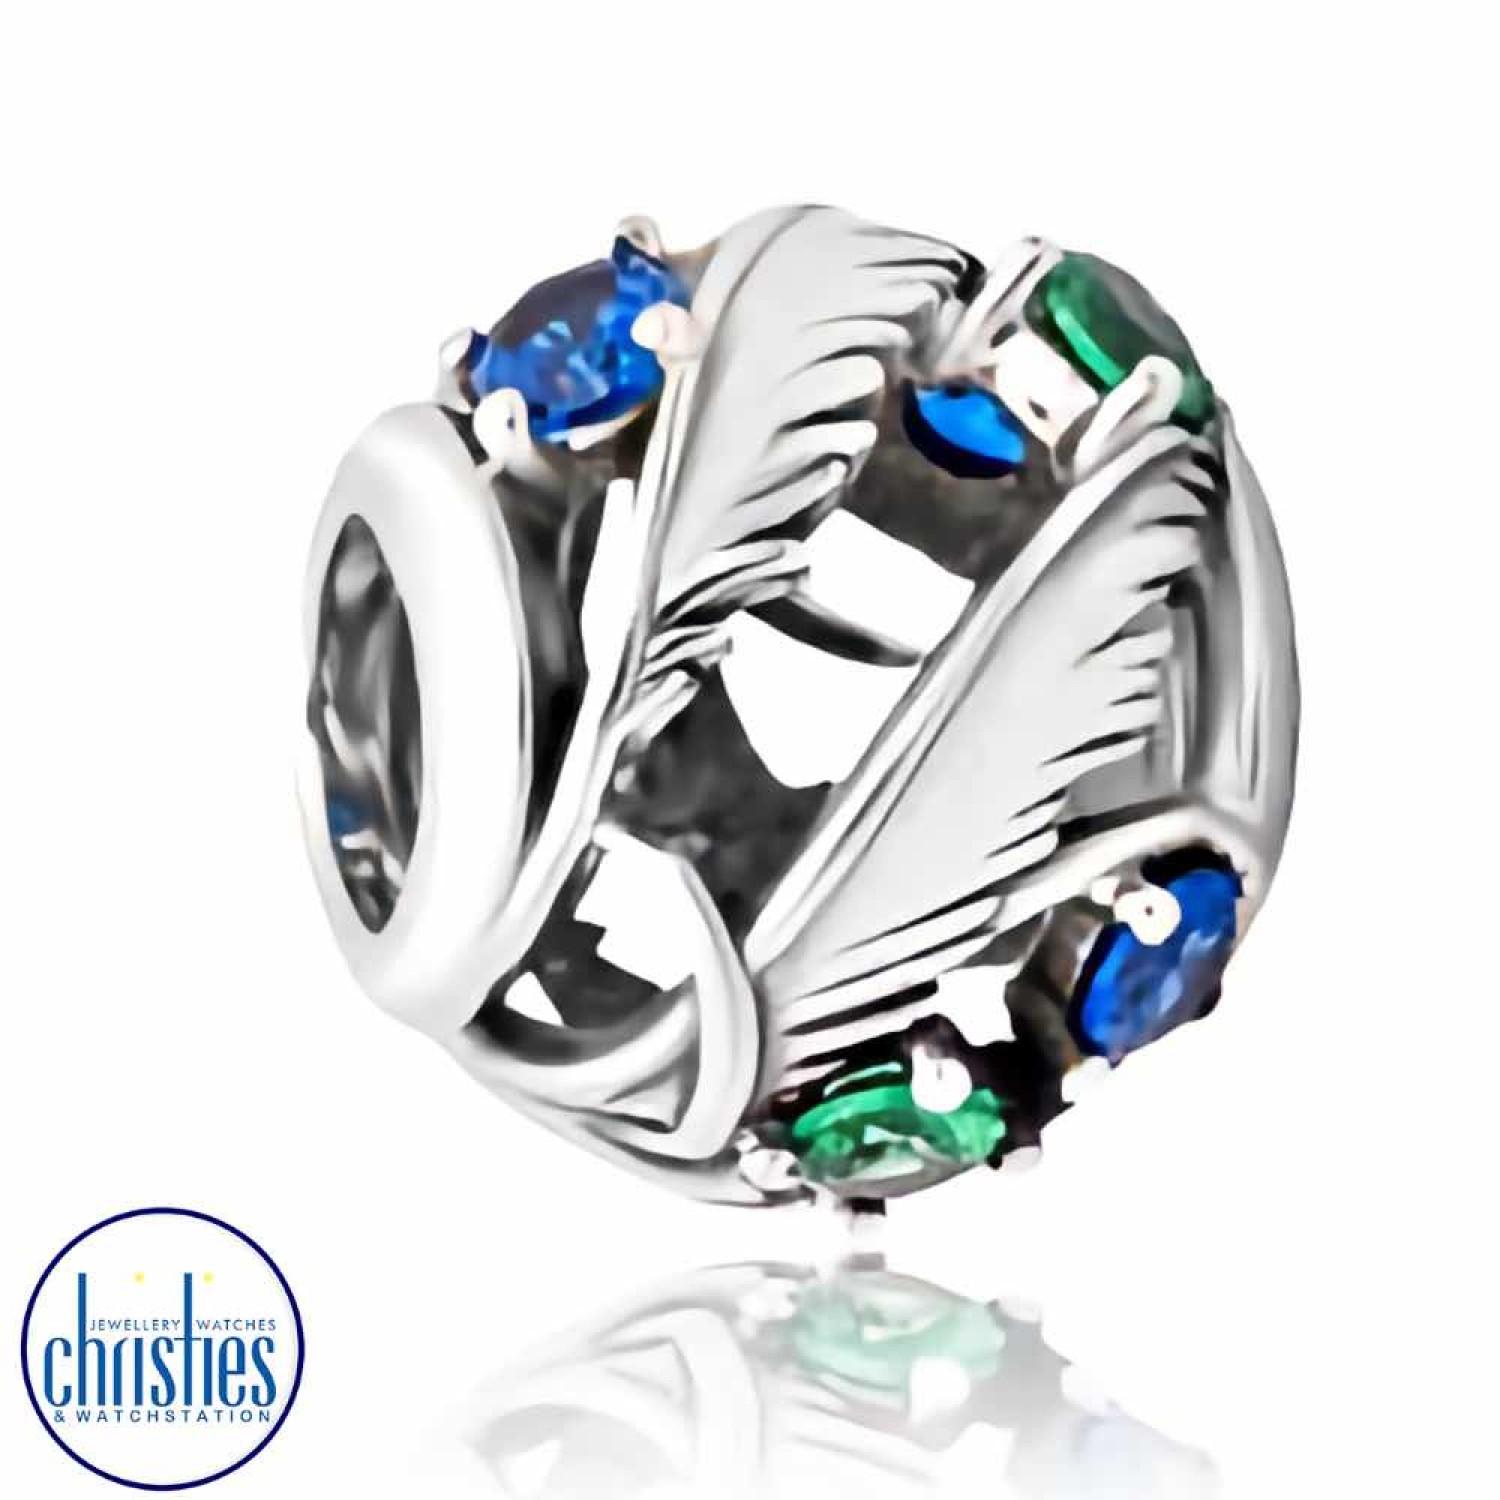 LKE081 Evolve Jewellery Toi Toi Charm. Toi Toi are synonymous with New Zealand gardens and coastal landscapes.This special charm features detailed ‘spear like’ flowering stems alongside blue and green cubic zirconia stones, representative of the panoramic